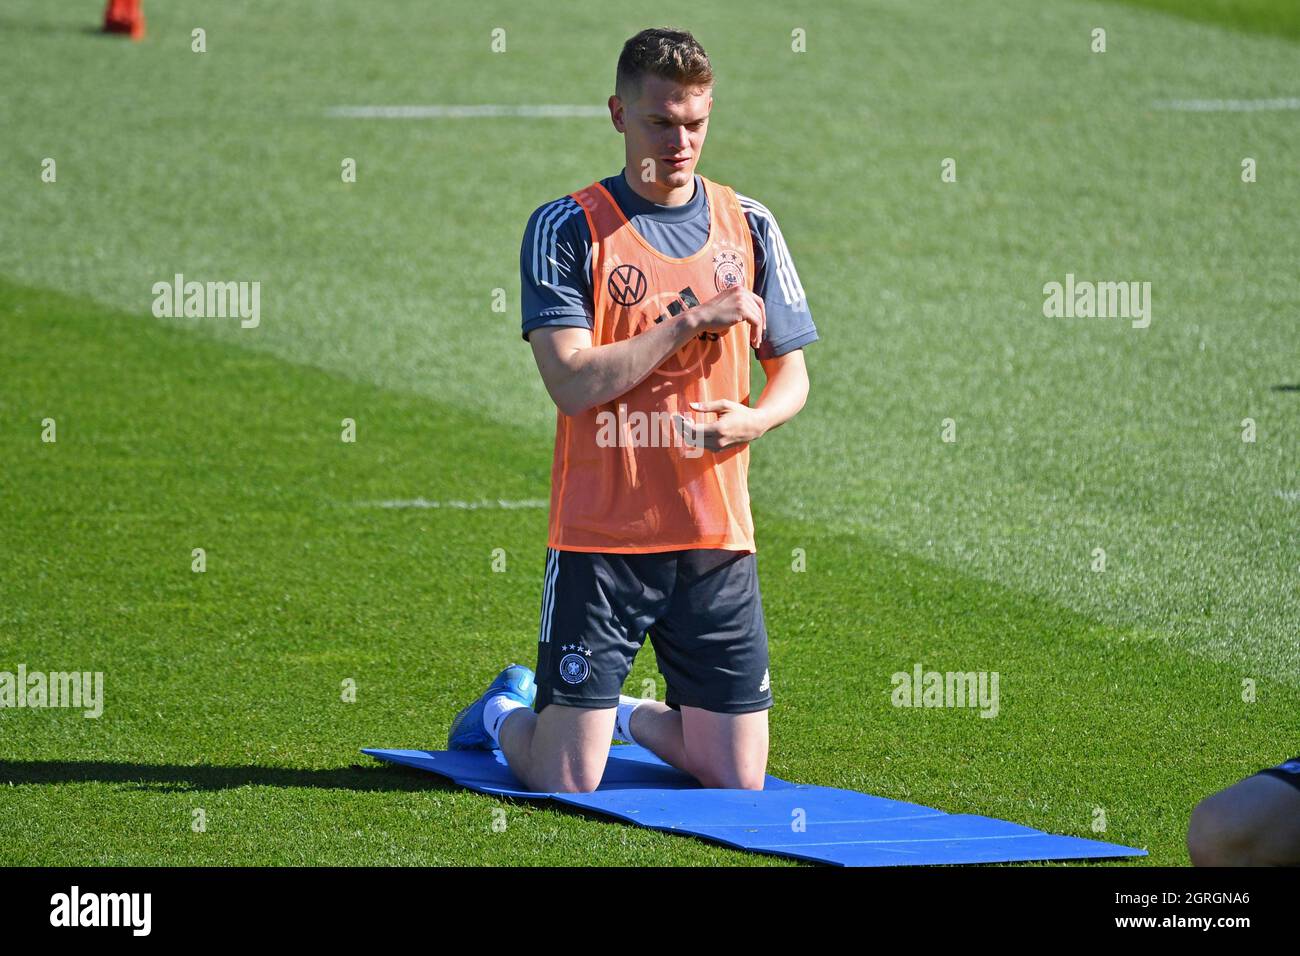 Matthias GINTER back in the DFB squad. Archive photo: Matthias GINTER  warming up, action, single action, single image, cutout, full body shot,  whole figure training. German national soccer team, training camp in